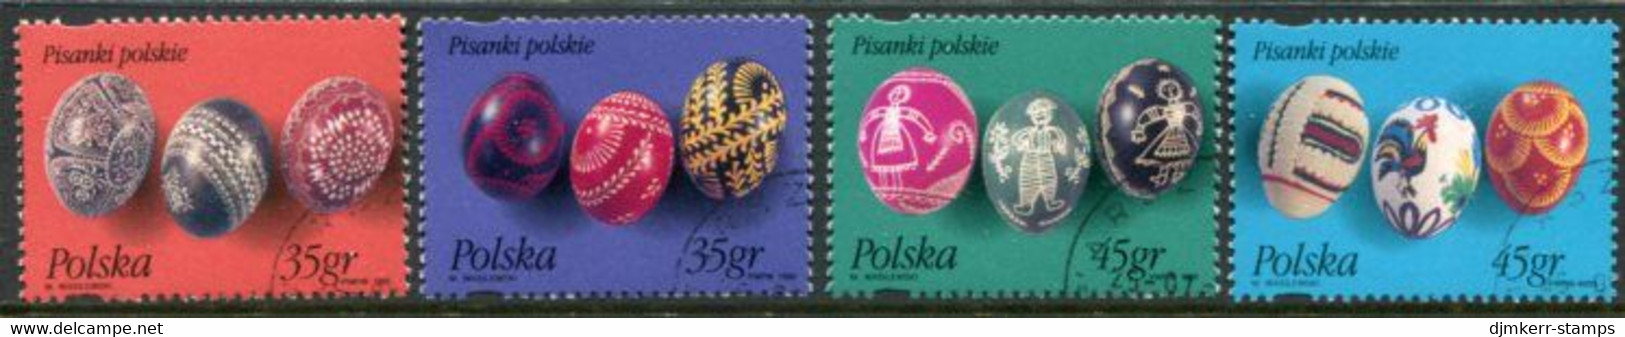 POLAND 1995 Decorated Easter Eggs Used.  Michel 3526-29 - Gebruikt